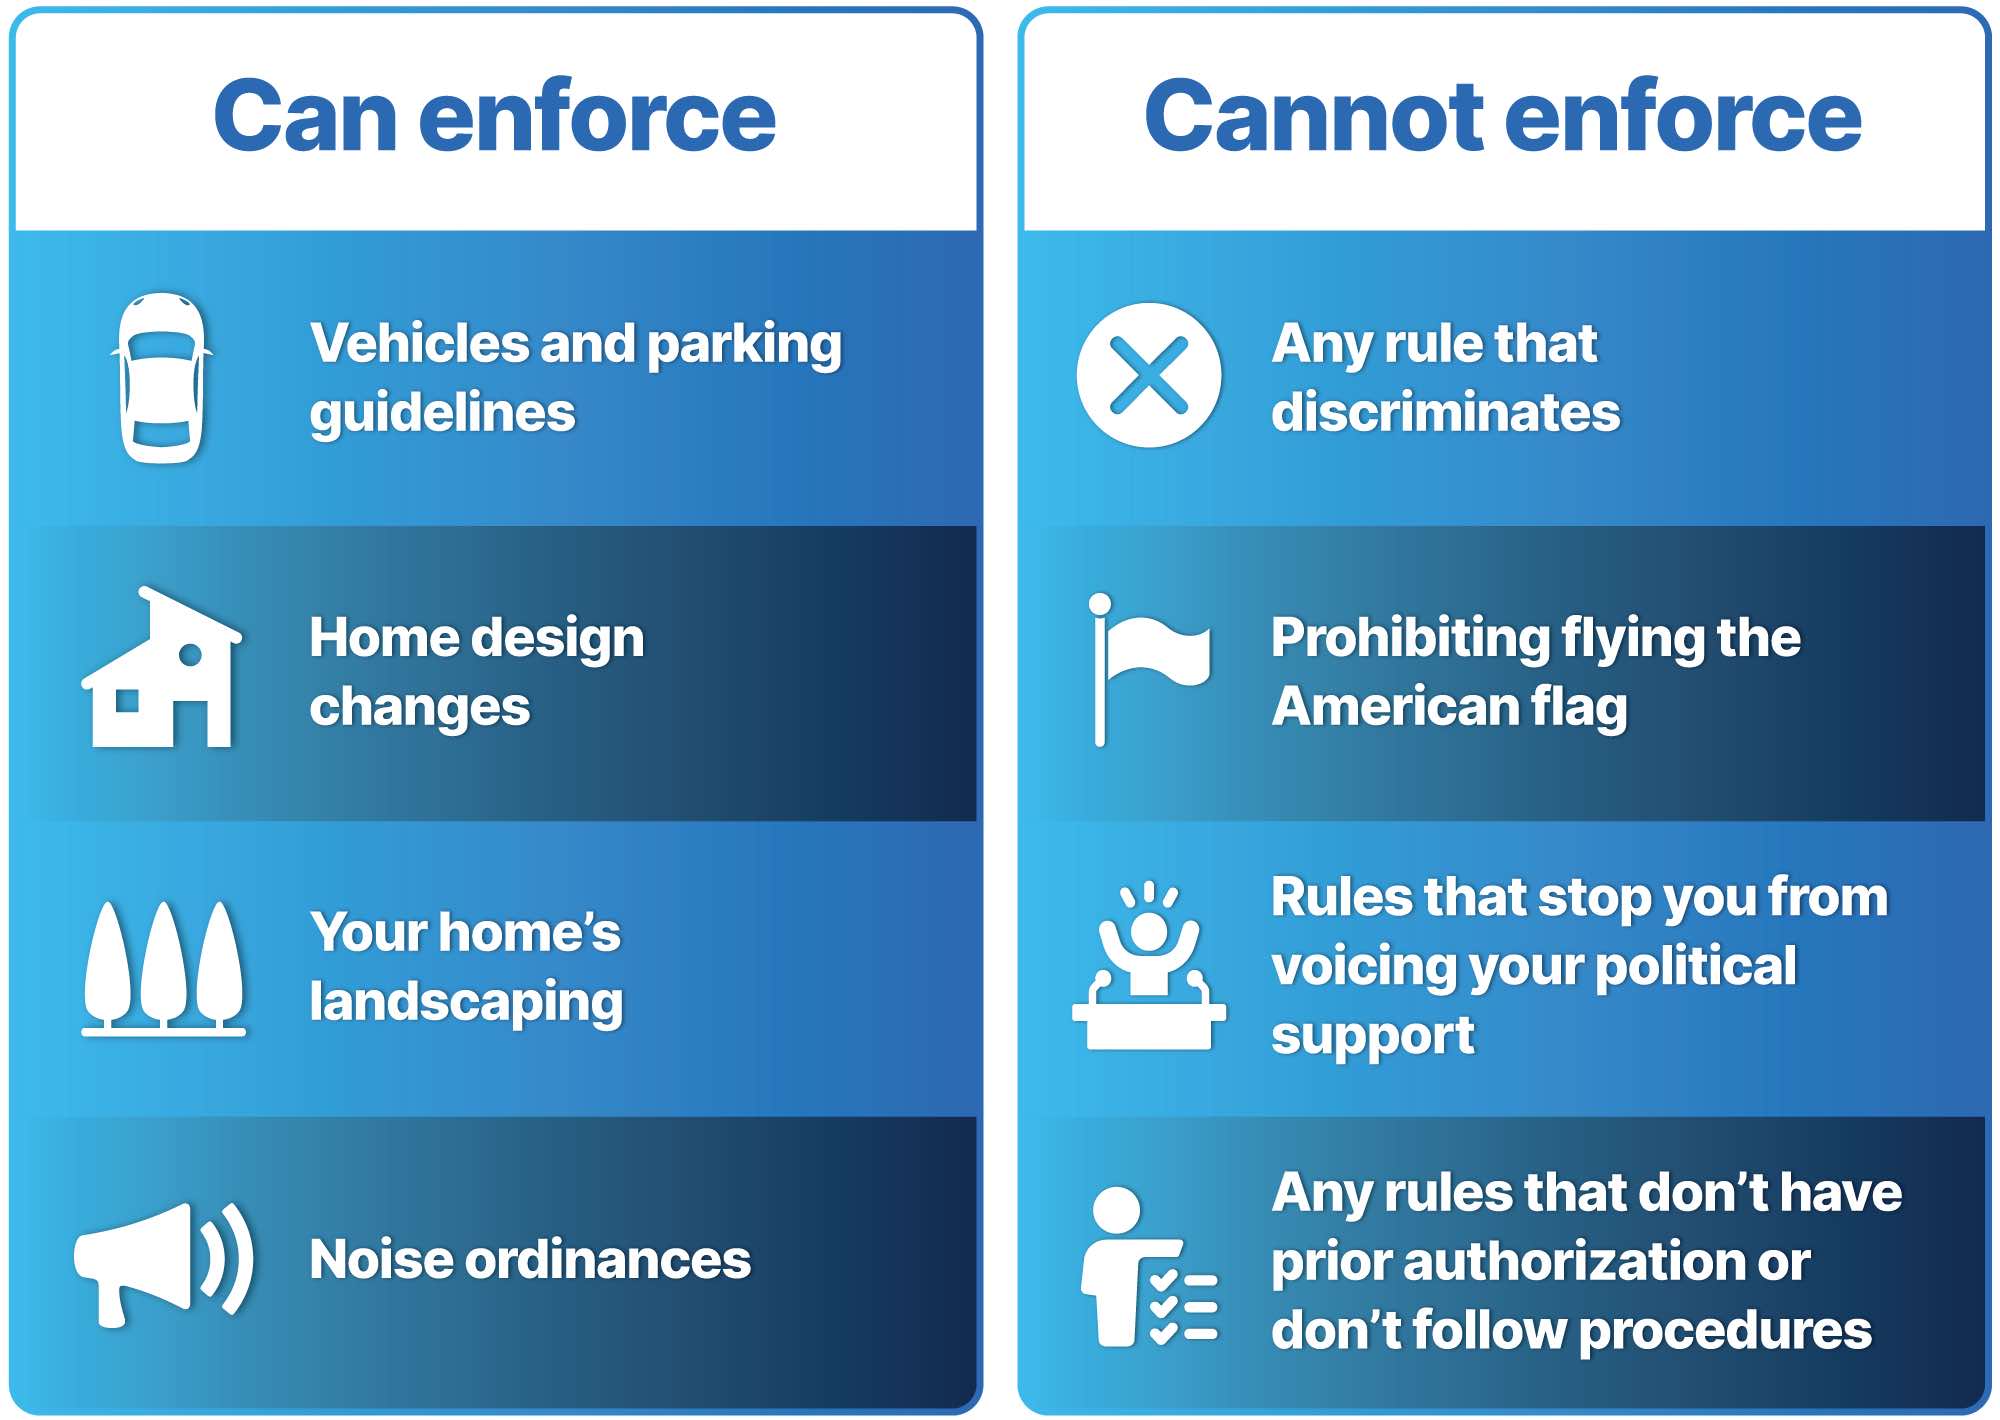 HOA's can enforce rules against parking, home design changes, landscaping, and noise ordinances. They cannot enforce rules that discriminate, prohibit flying the American flag, rules against voicing political support, and rules that don't have prior authorization. 